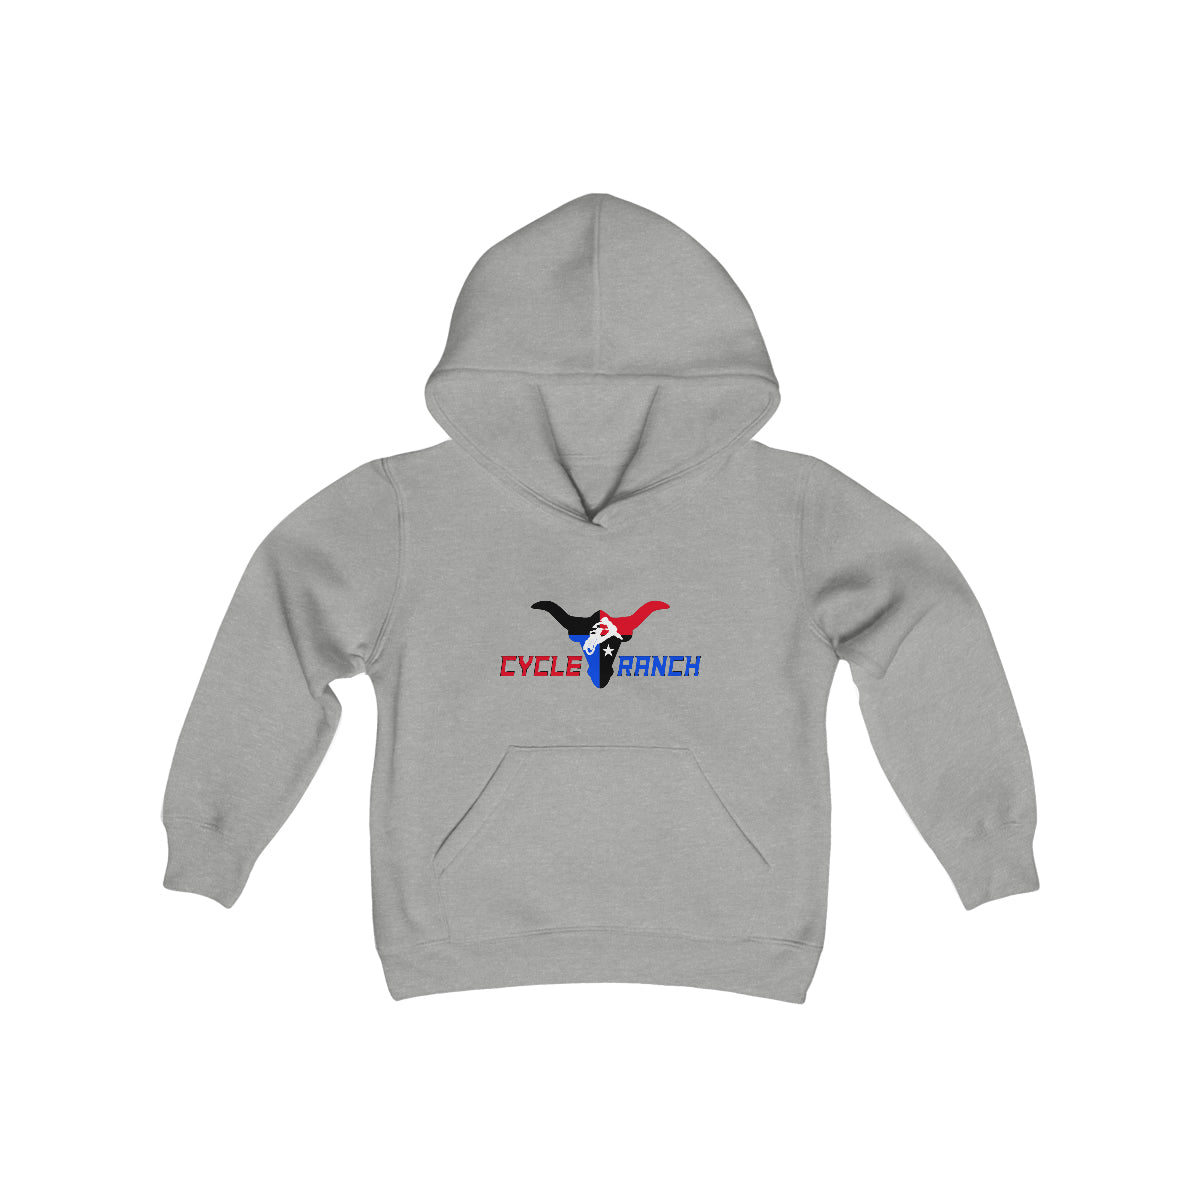 Cycle Ranch - Youth Heavy Blend Hooded Sweatshirt